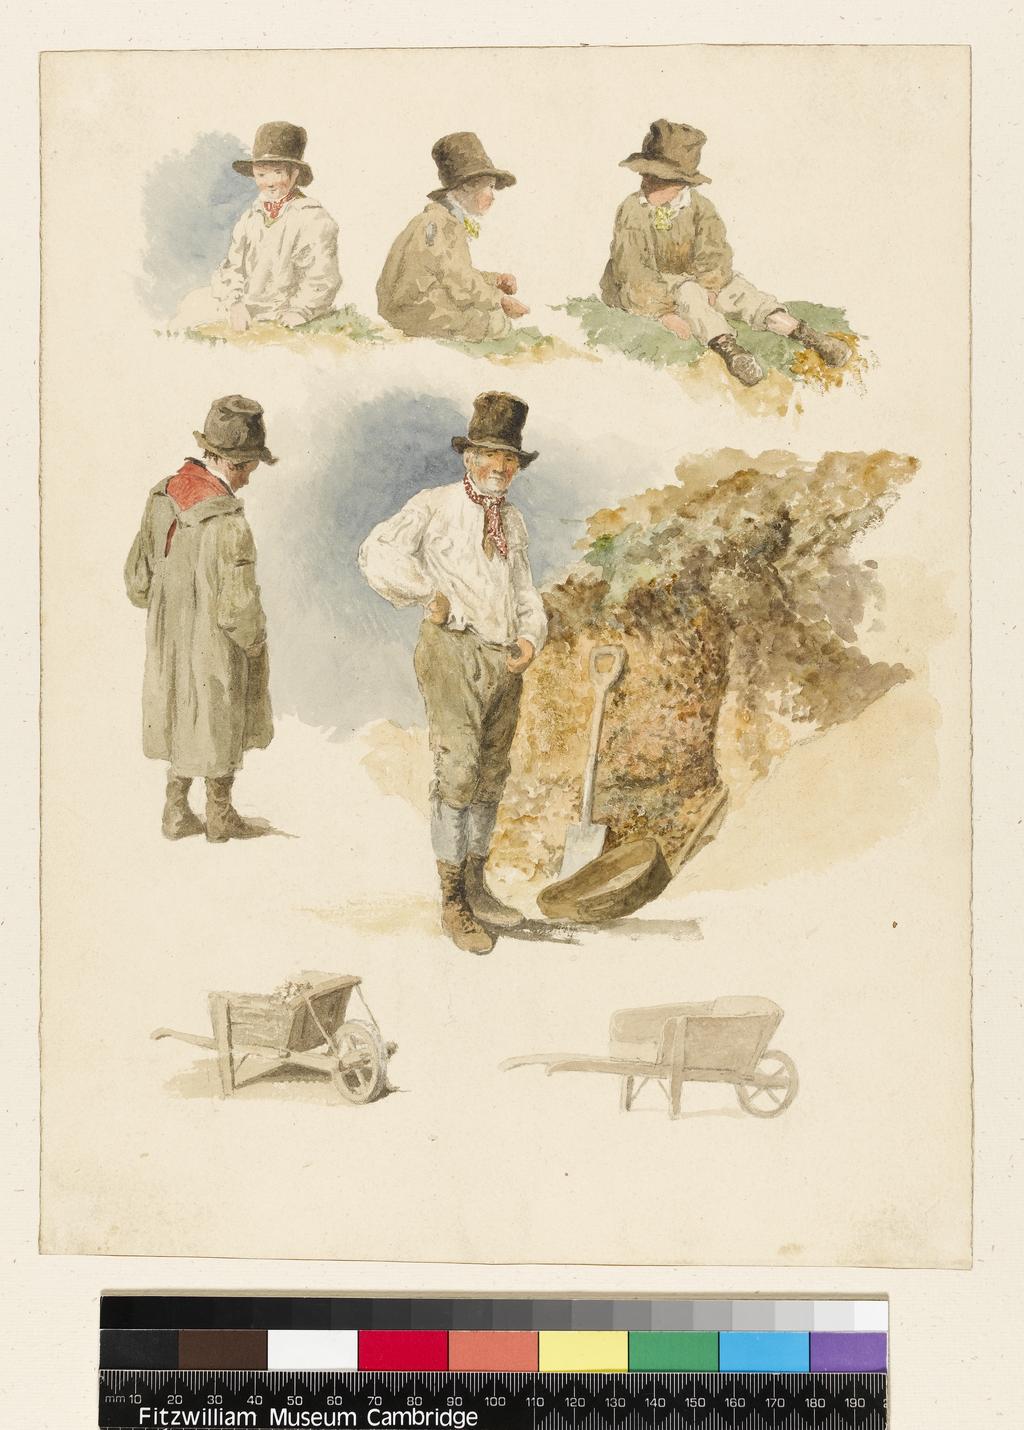 An image of Title/s: Studies of a gardener, children and wheelbarrows Maker/s: Hills, Robert (draughtsman) [ULAN info: British artist, 1769-1844]Technique Description: graphite and watercolour on paper Dimensions: height: 305 mm, width: 233 mm